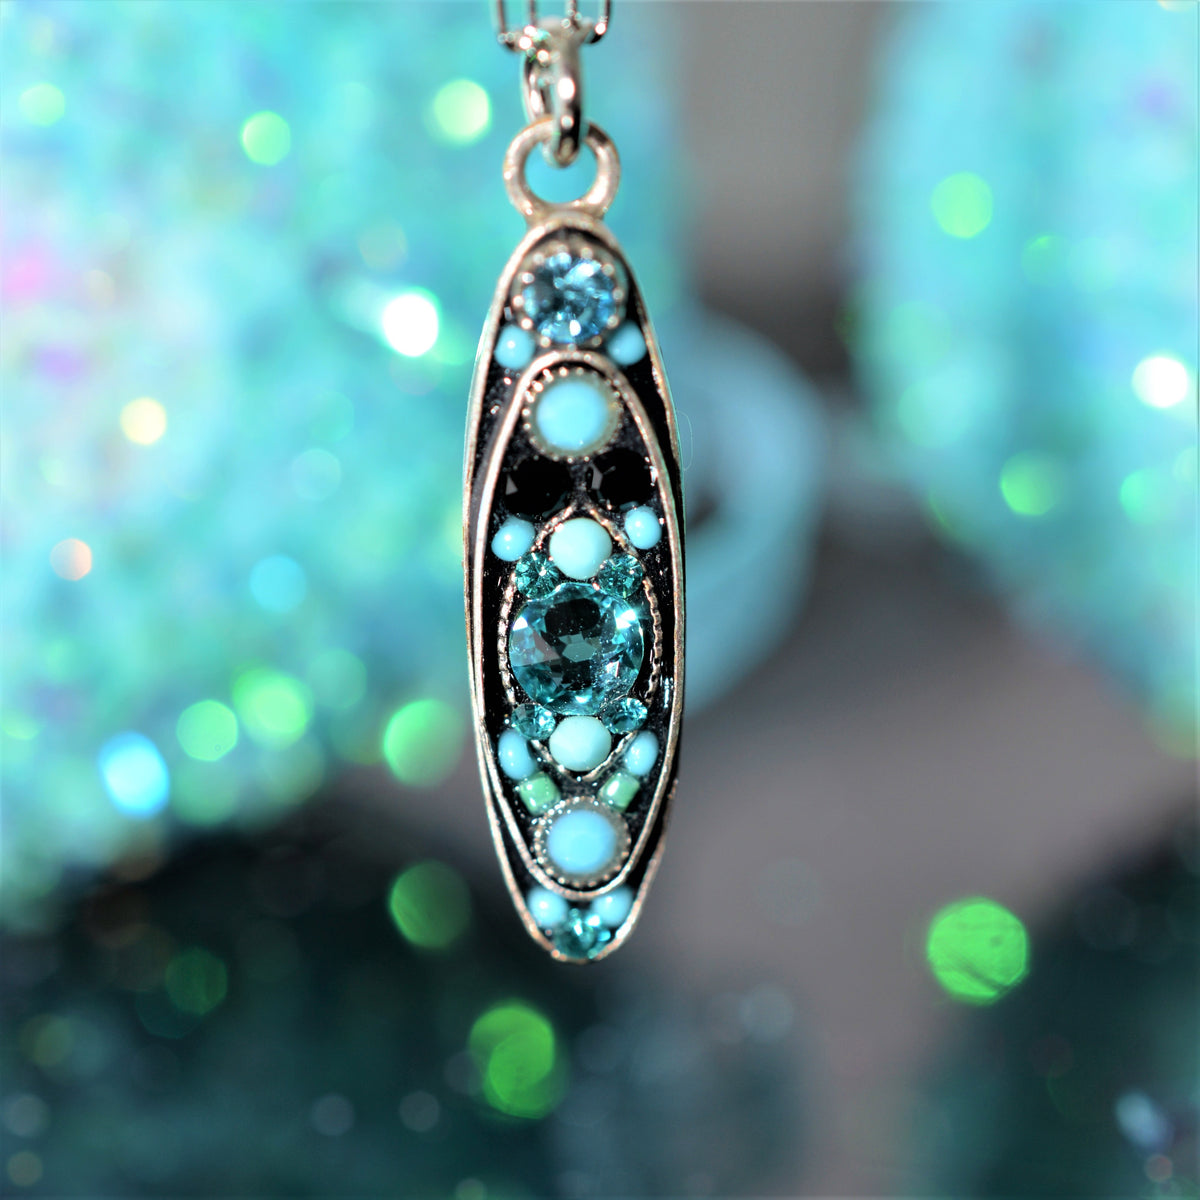 Antique Silver Plated Turquoise Long Oval Pendant by Firefly